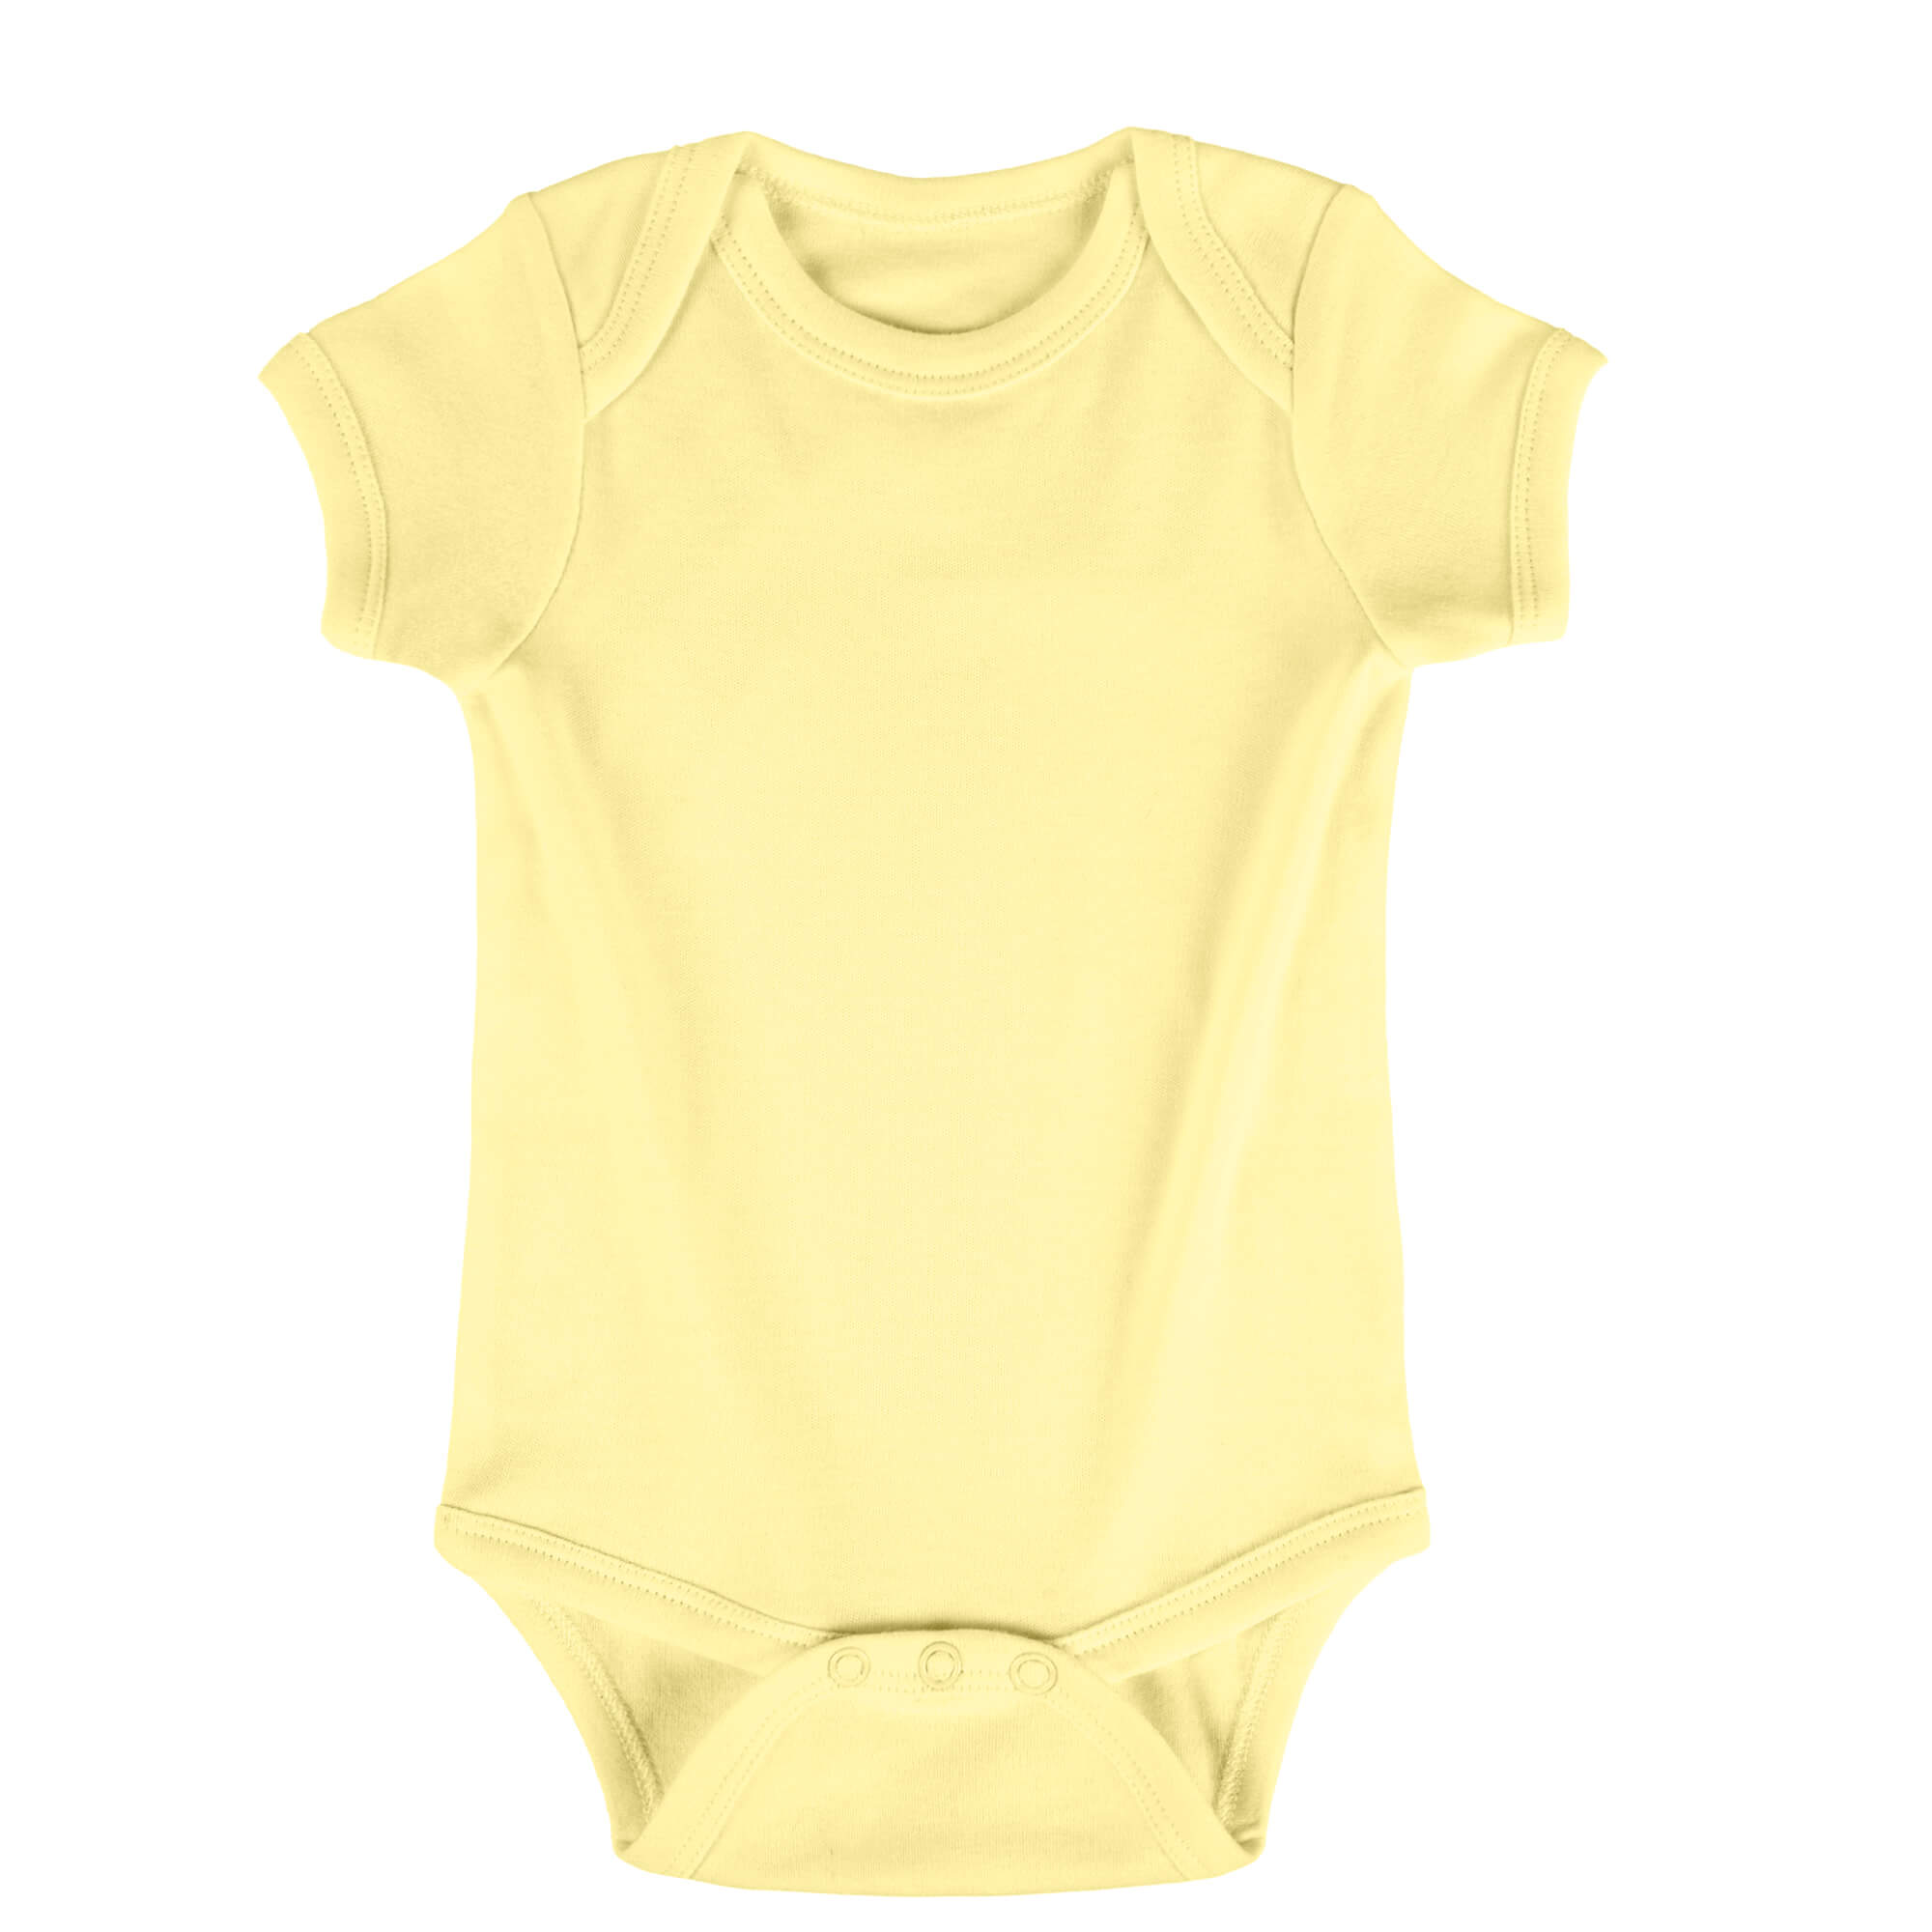 light yellow color number #44, onesie color selection, and color display.